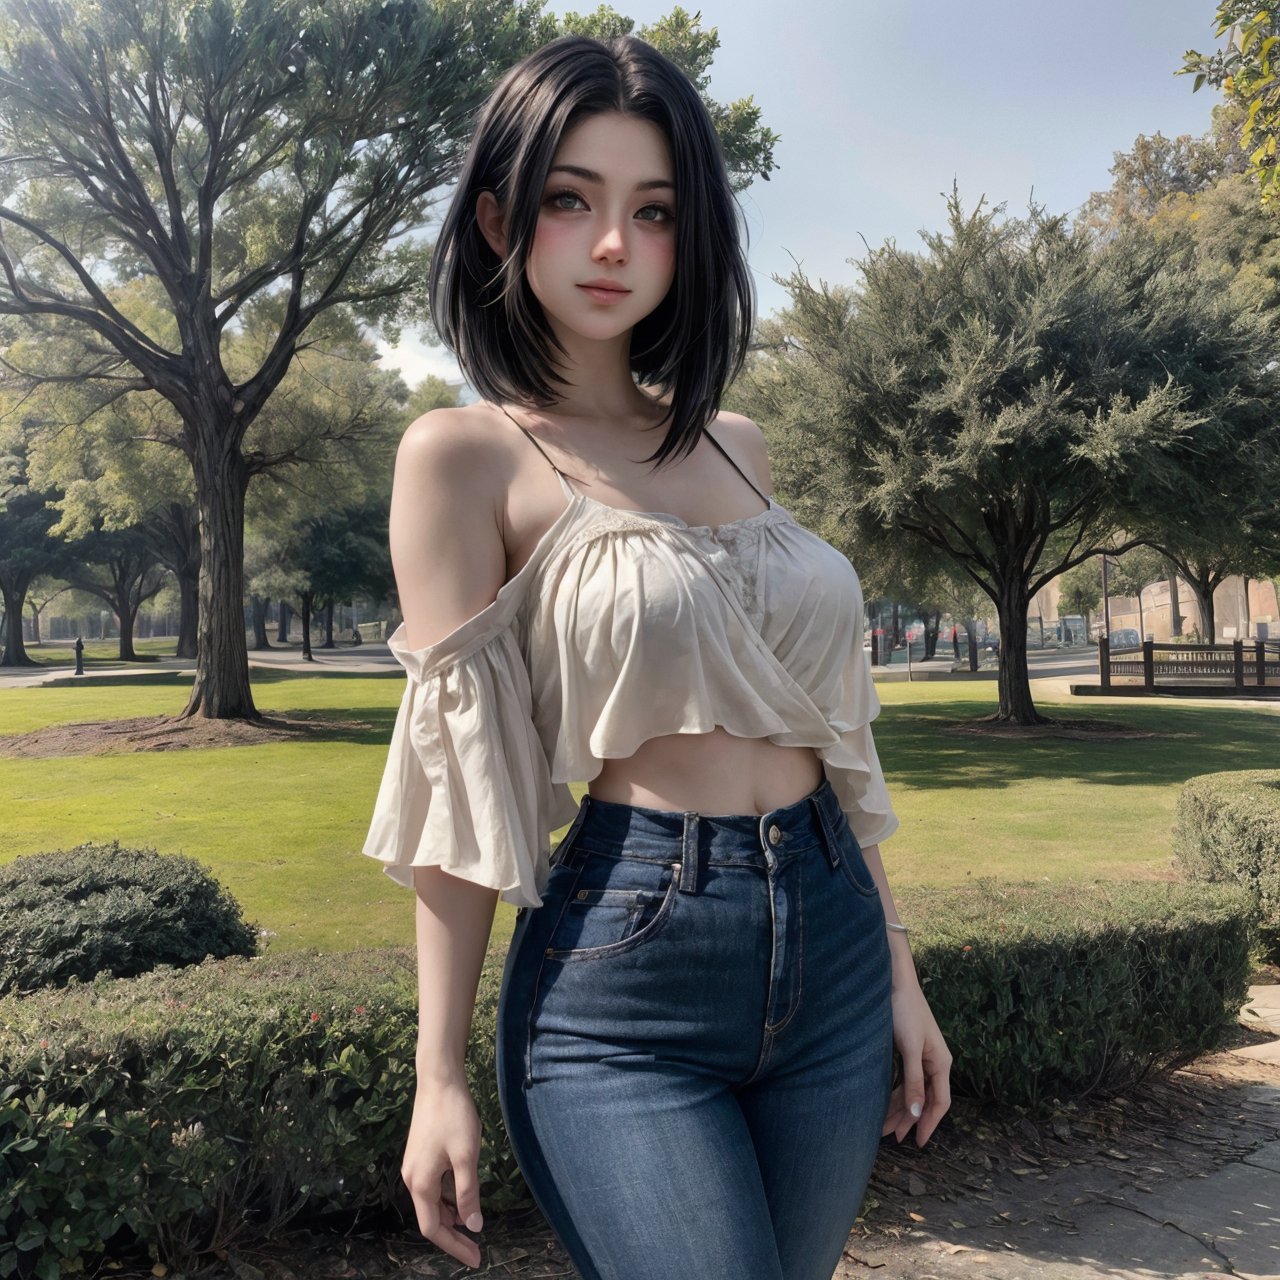 Capture an epic photograph of a beautiful girl in casual attire, with black hair, standing in a picturesque park. Ensure the image boasts high detail and professional lighting to create a stunning, magazine-worthy shot.